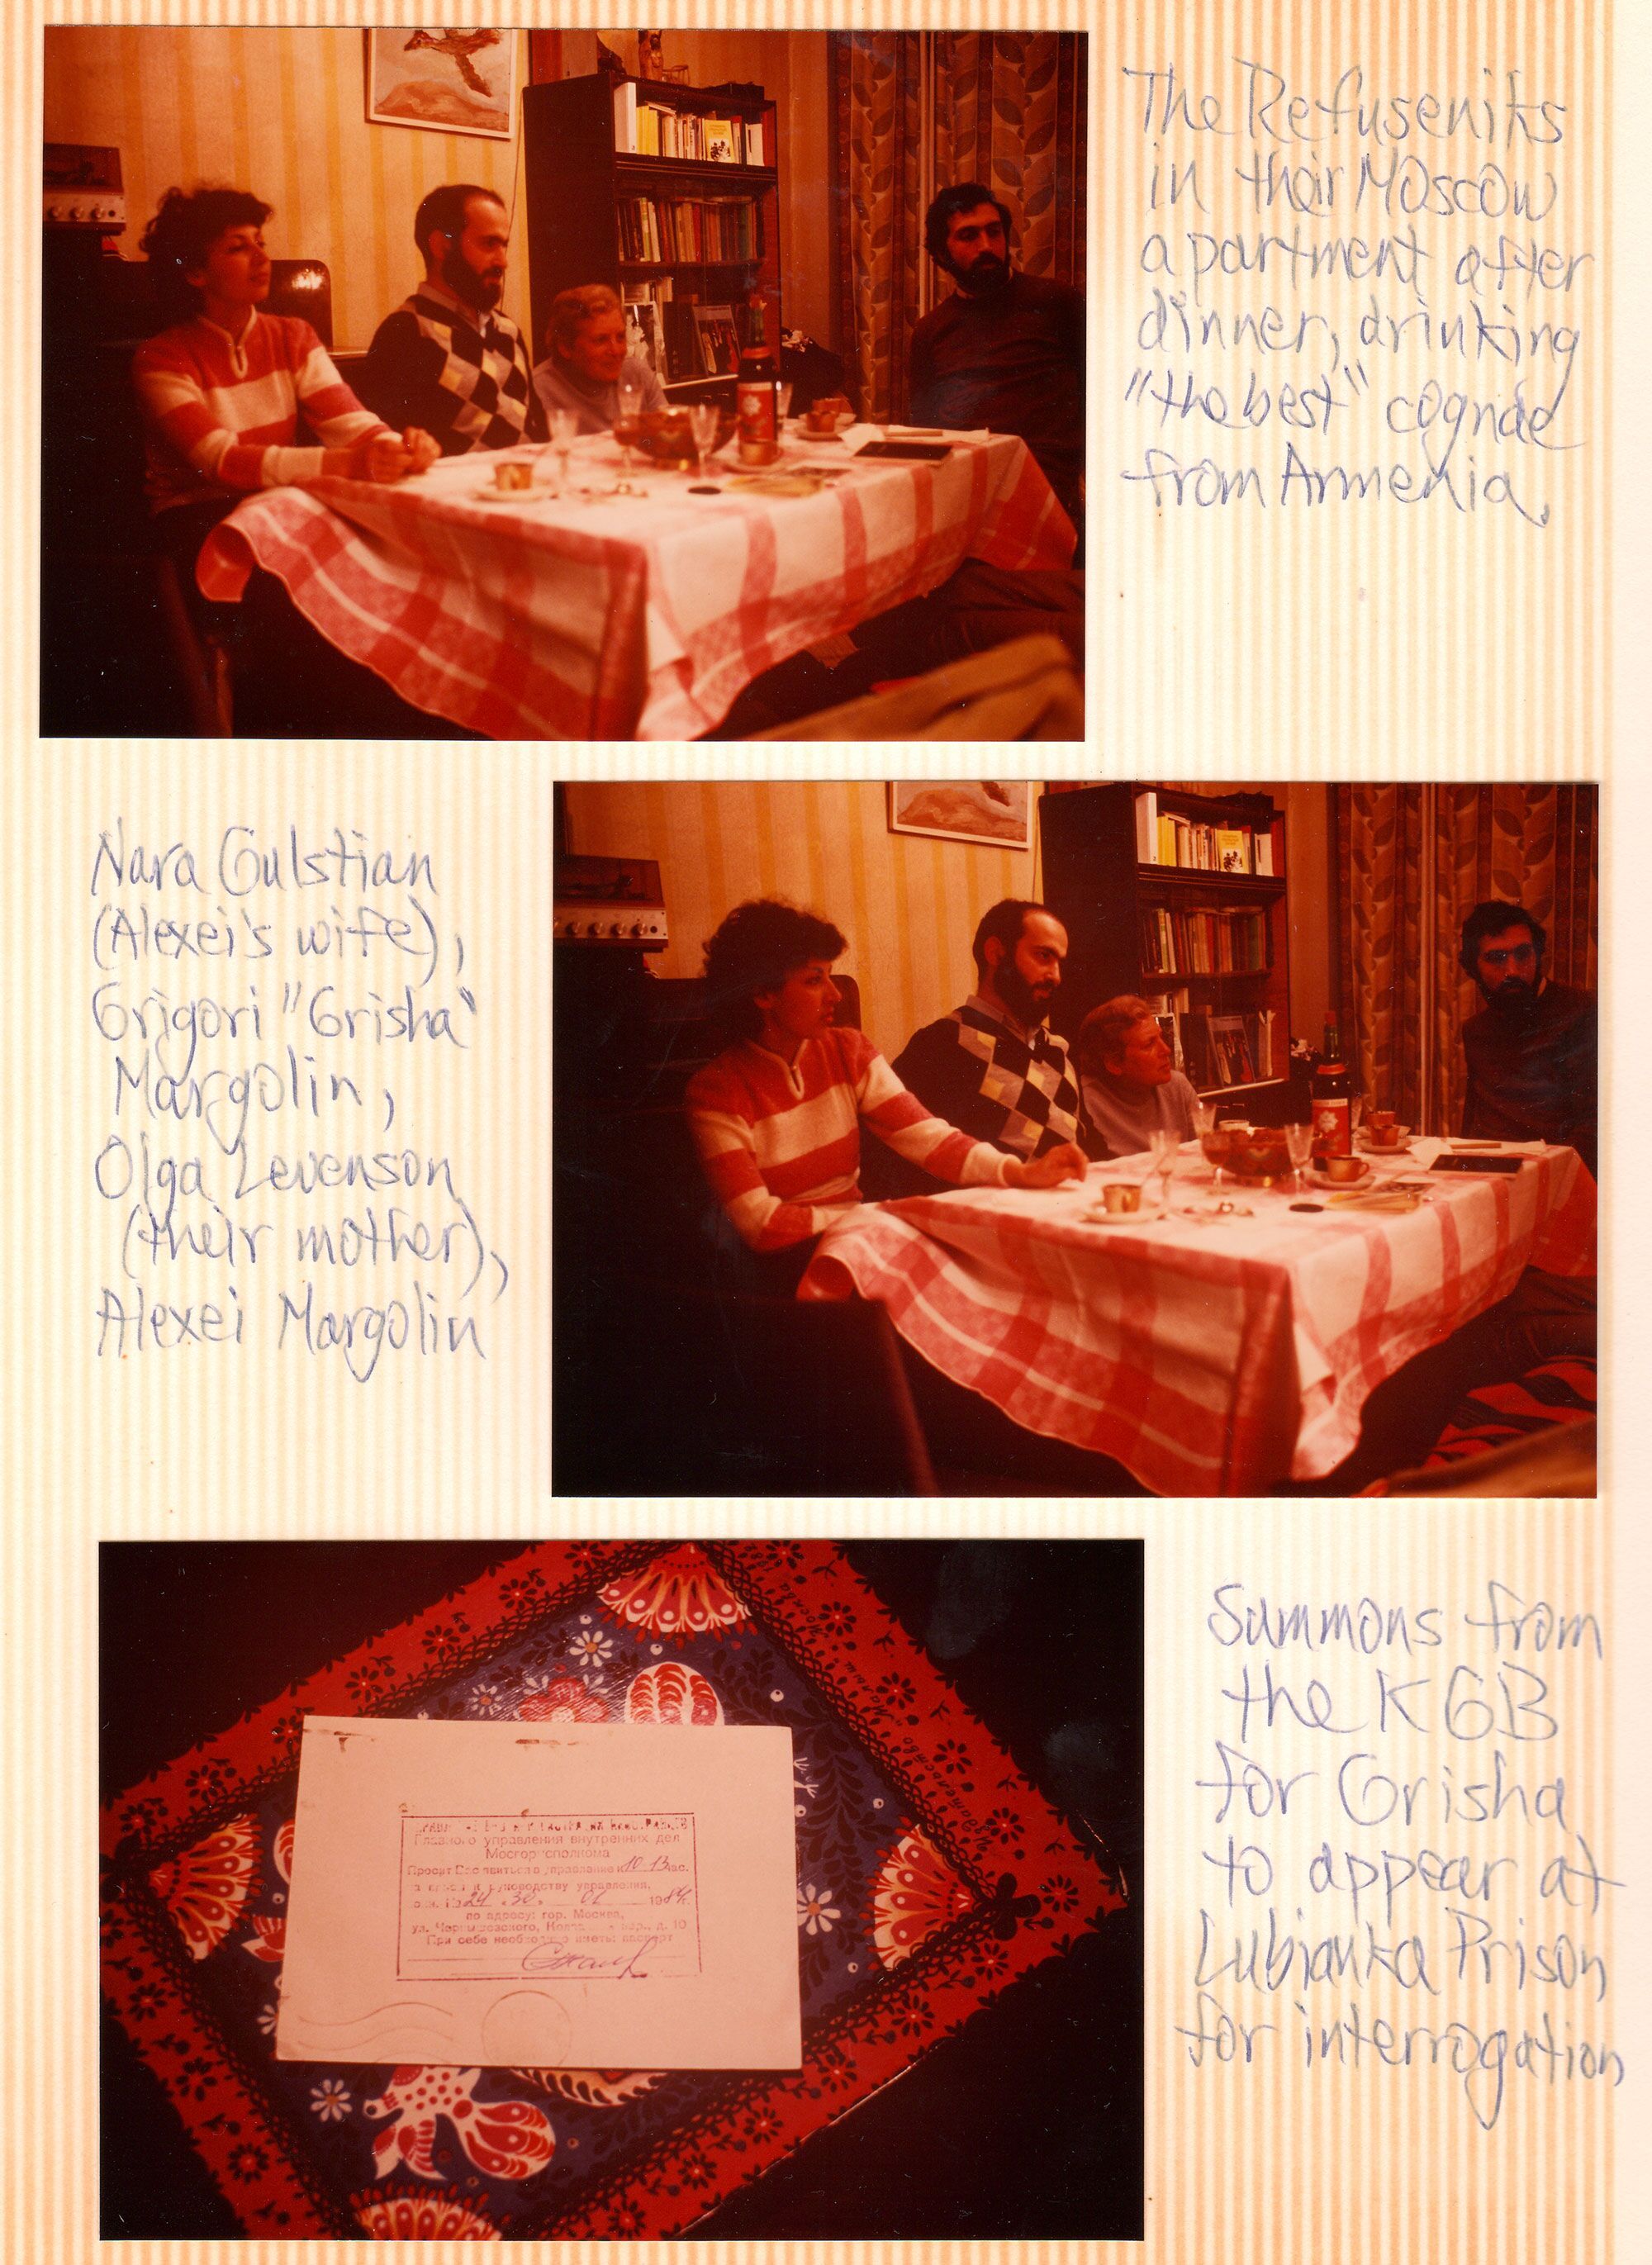 Scan from Hamer's scrapbook, showing the dinner with the Margolin family.